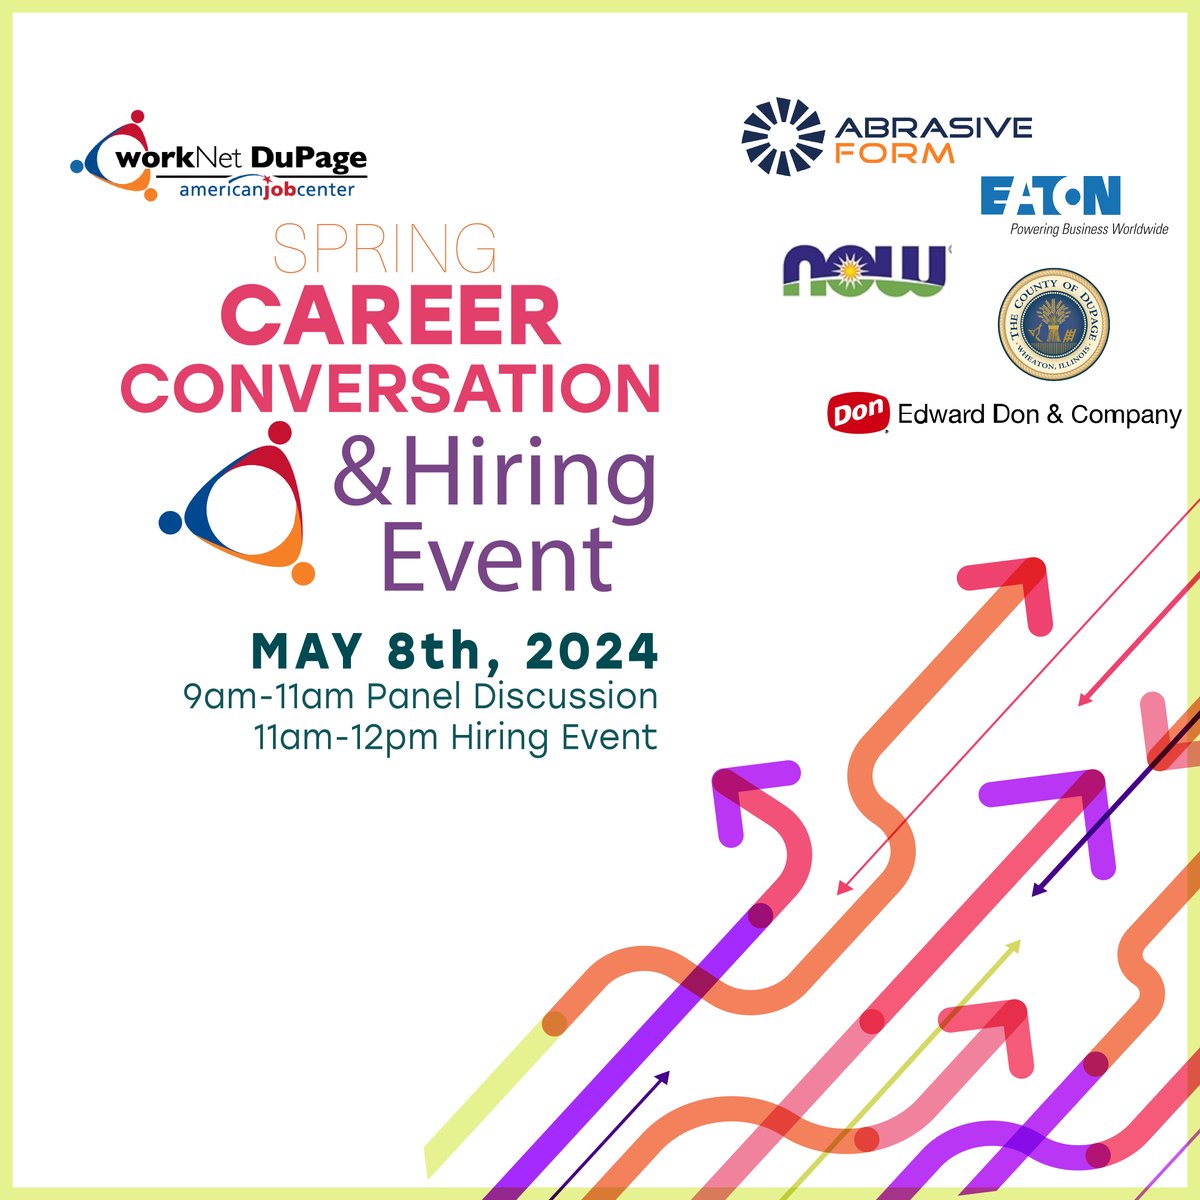 👉👉👉  ONLY A HANDFUL OF SPOTS LEFT ❗❗❗

Career Conversation & Hiring Event 
Wednesday, May 8 
9am - 12pm

Info & registration:
ow.ly/eIja50RsYvQ